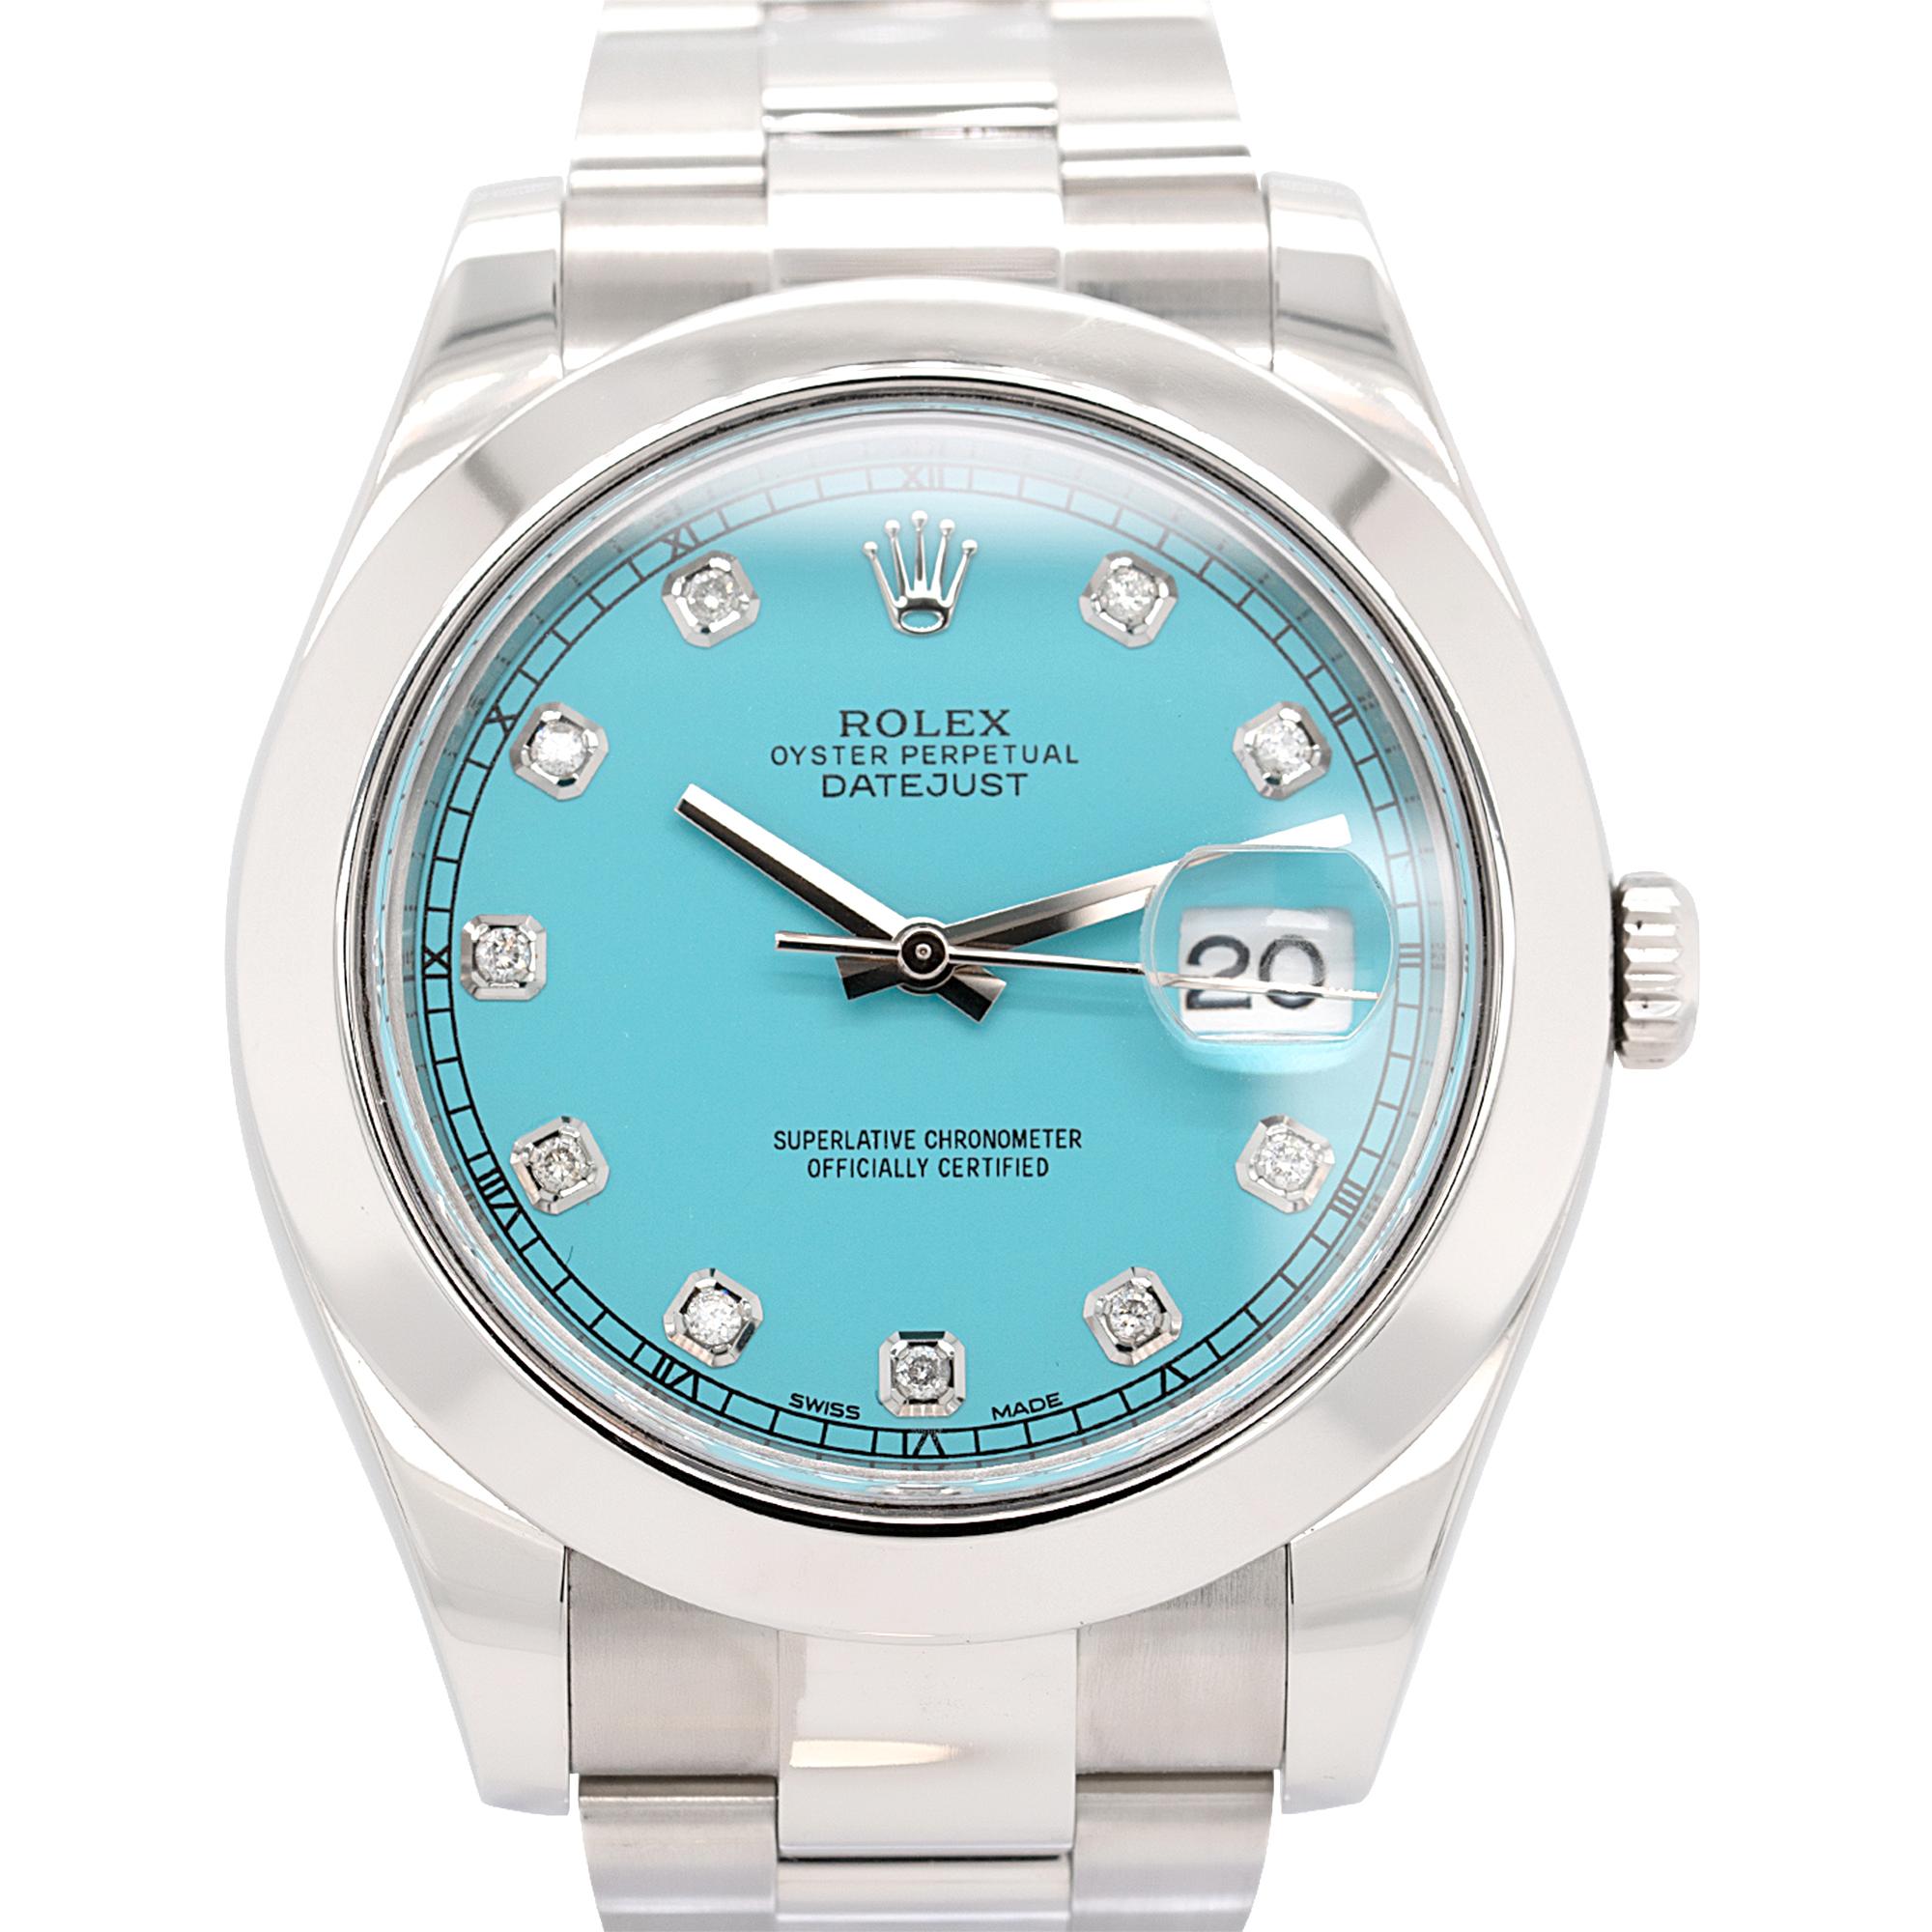 Brand: Rolex

MPN: 116300

Model: Datejust II

Case Material: Stainless Steel

Case Diameter: 41mm

Crystal: Sapphire Crystal

Bezel: Stainless steel smooth bezel

Dial: Turquoise dial with Diamond hour markers and silver hands. Date can be found at